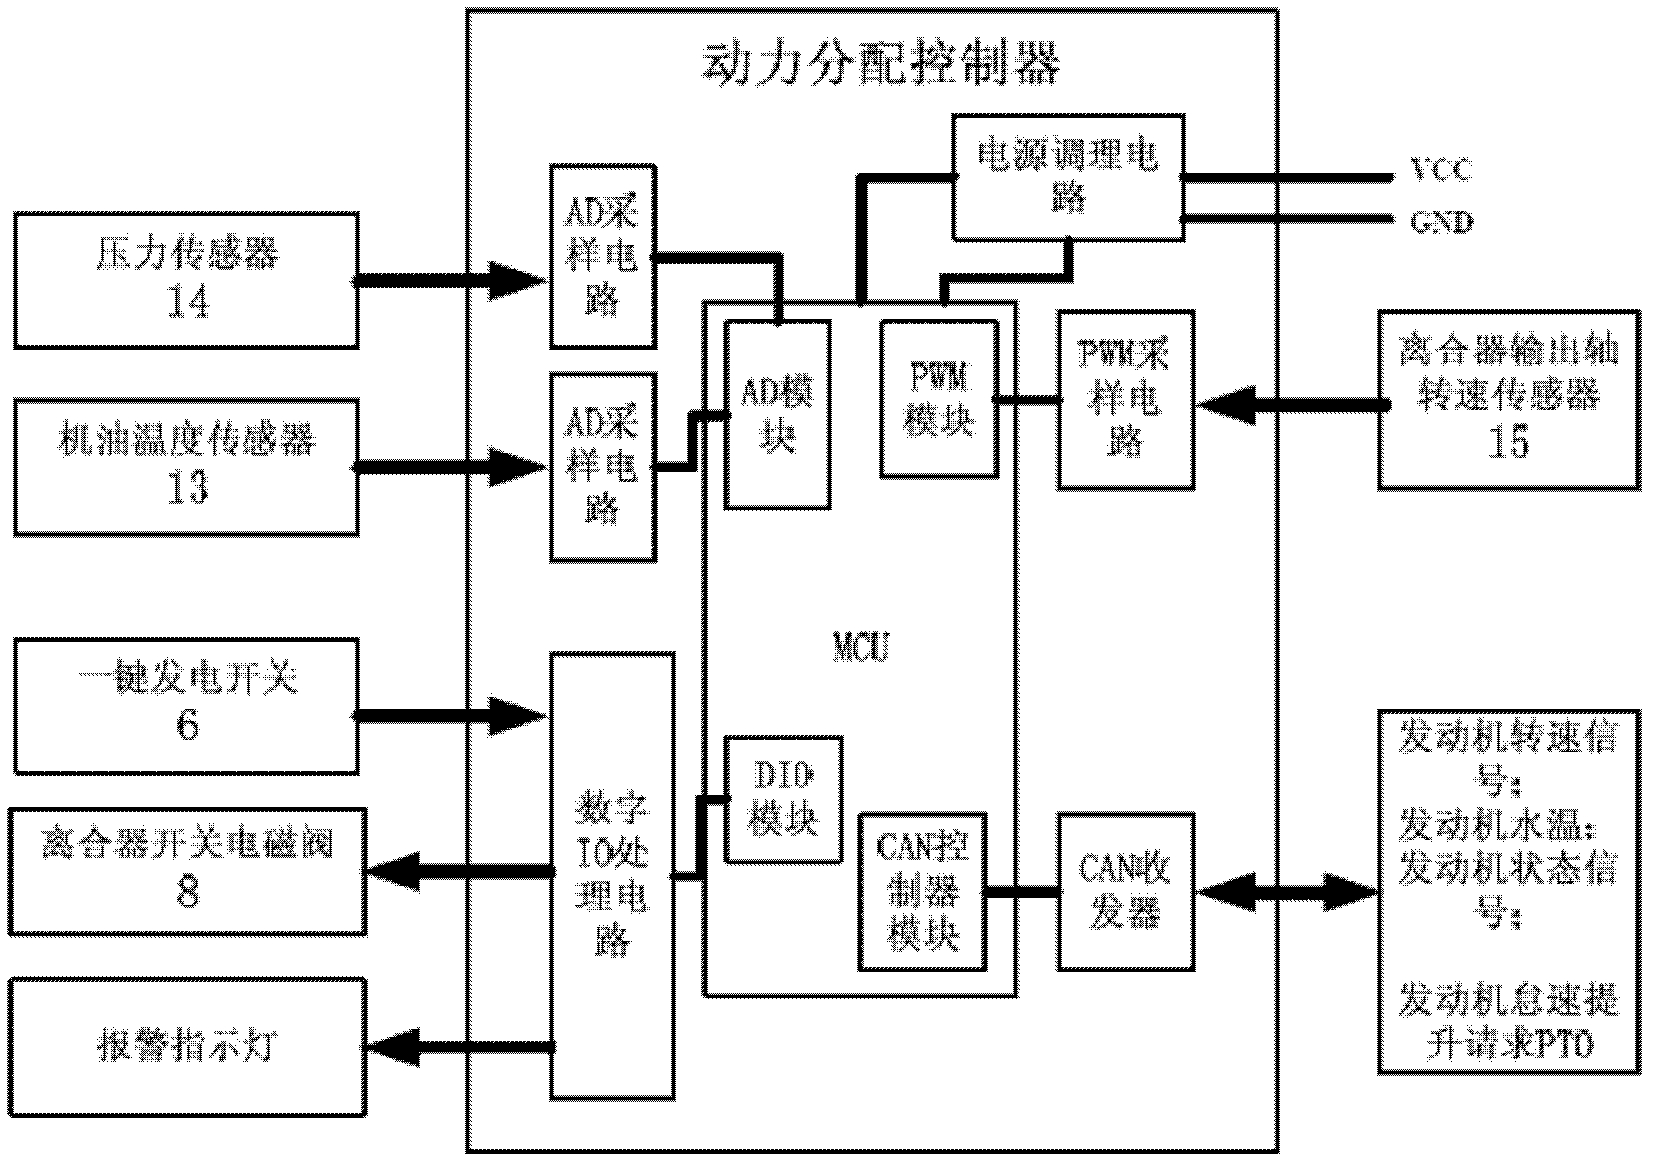 Vehicle-mounted one-key constant-frequency power generation system and vehicle-mounted one-key constant-frequency power generation control system and method